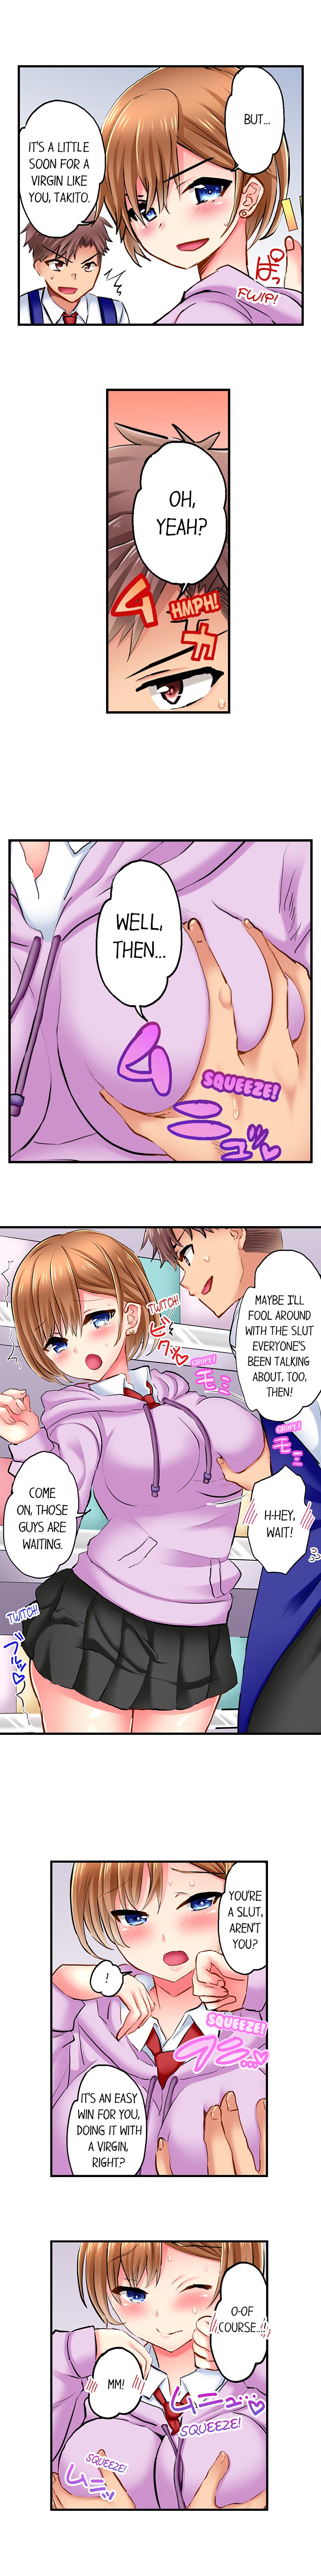 Sex in the Adult Toys Section - Chapter 2 Page 5